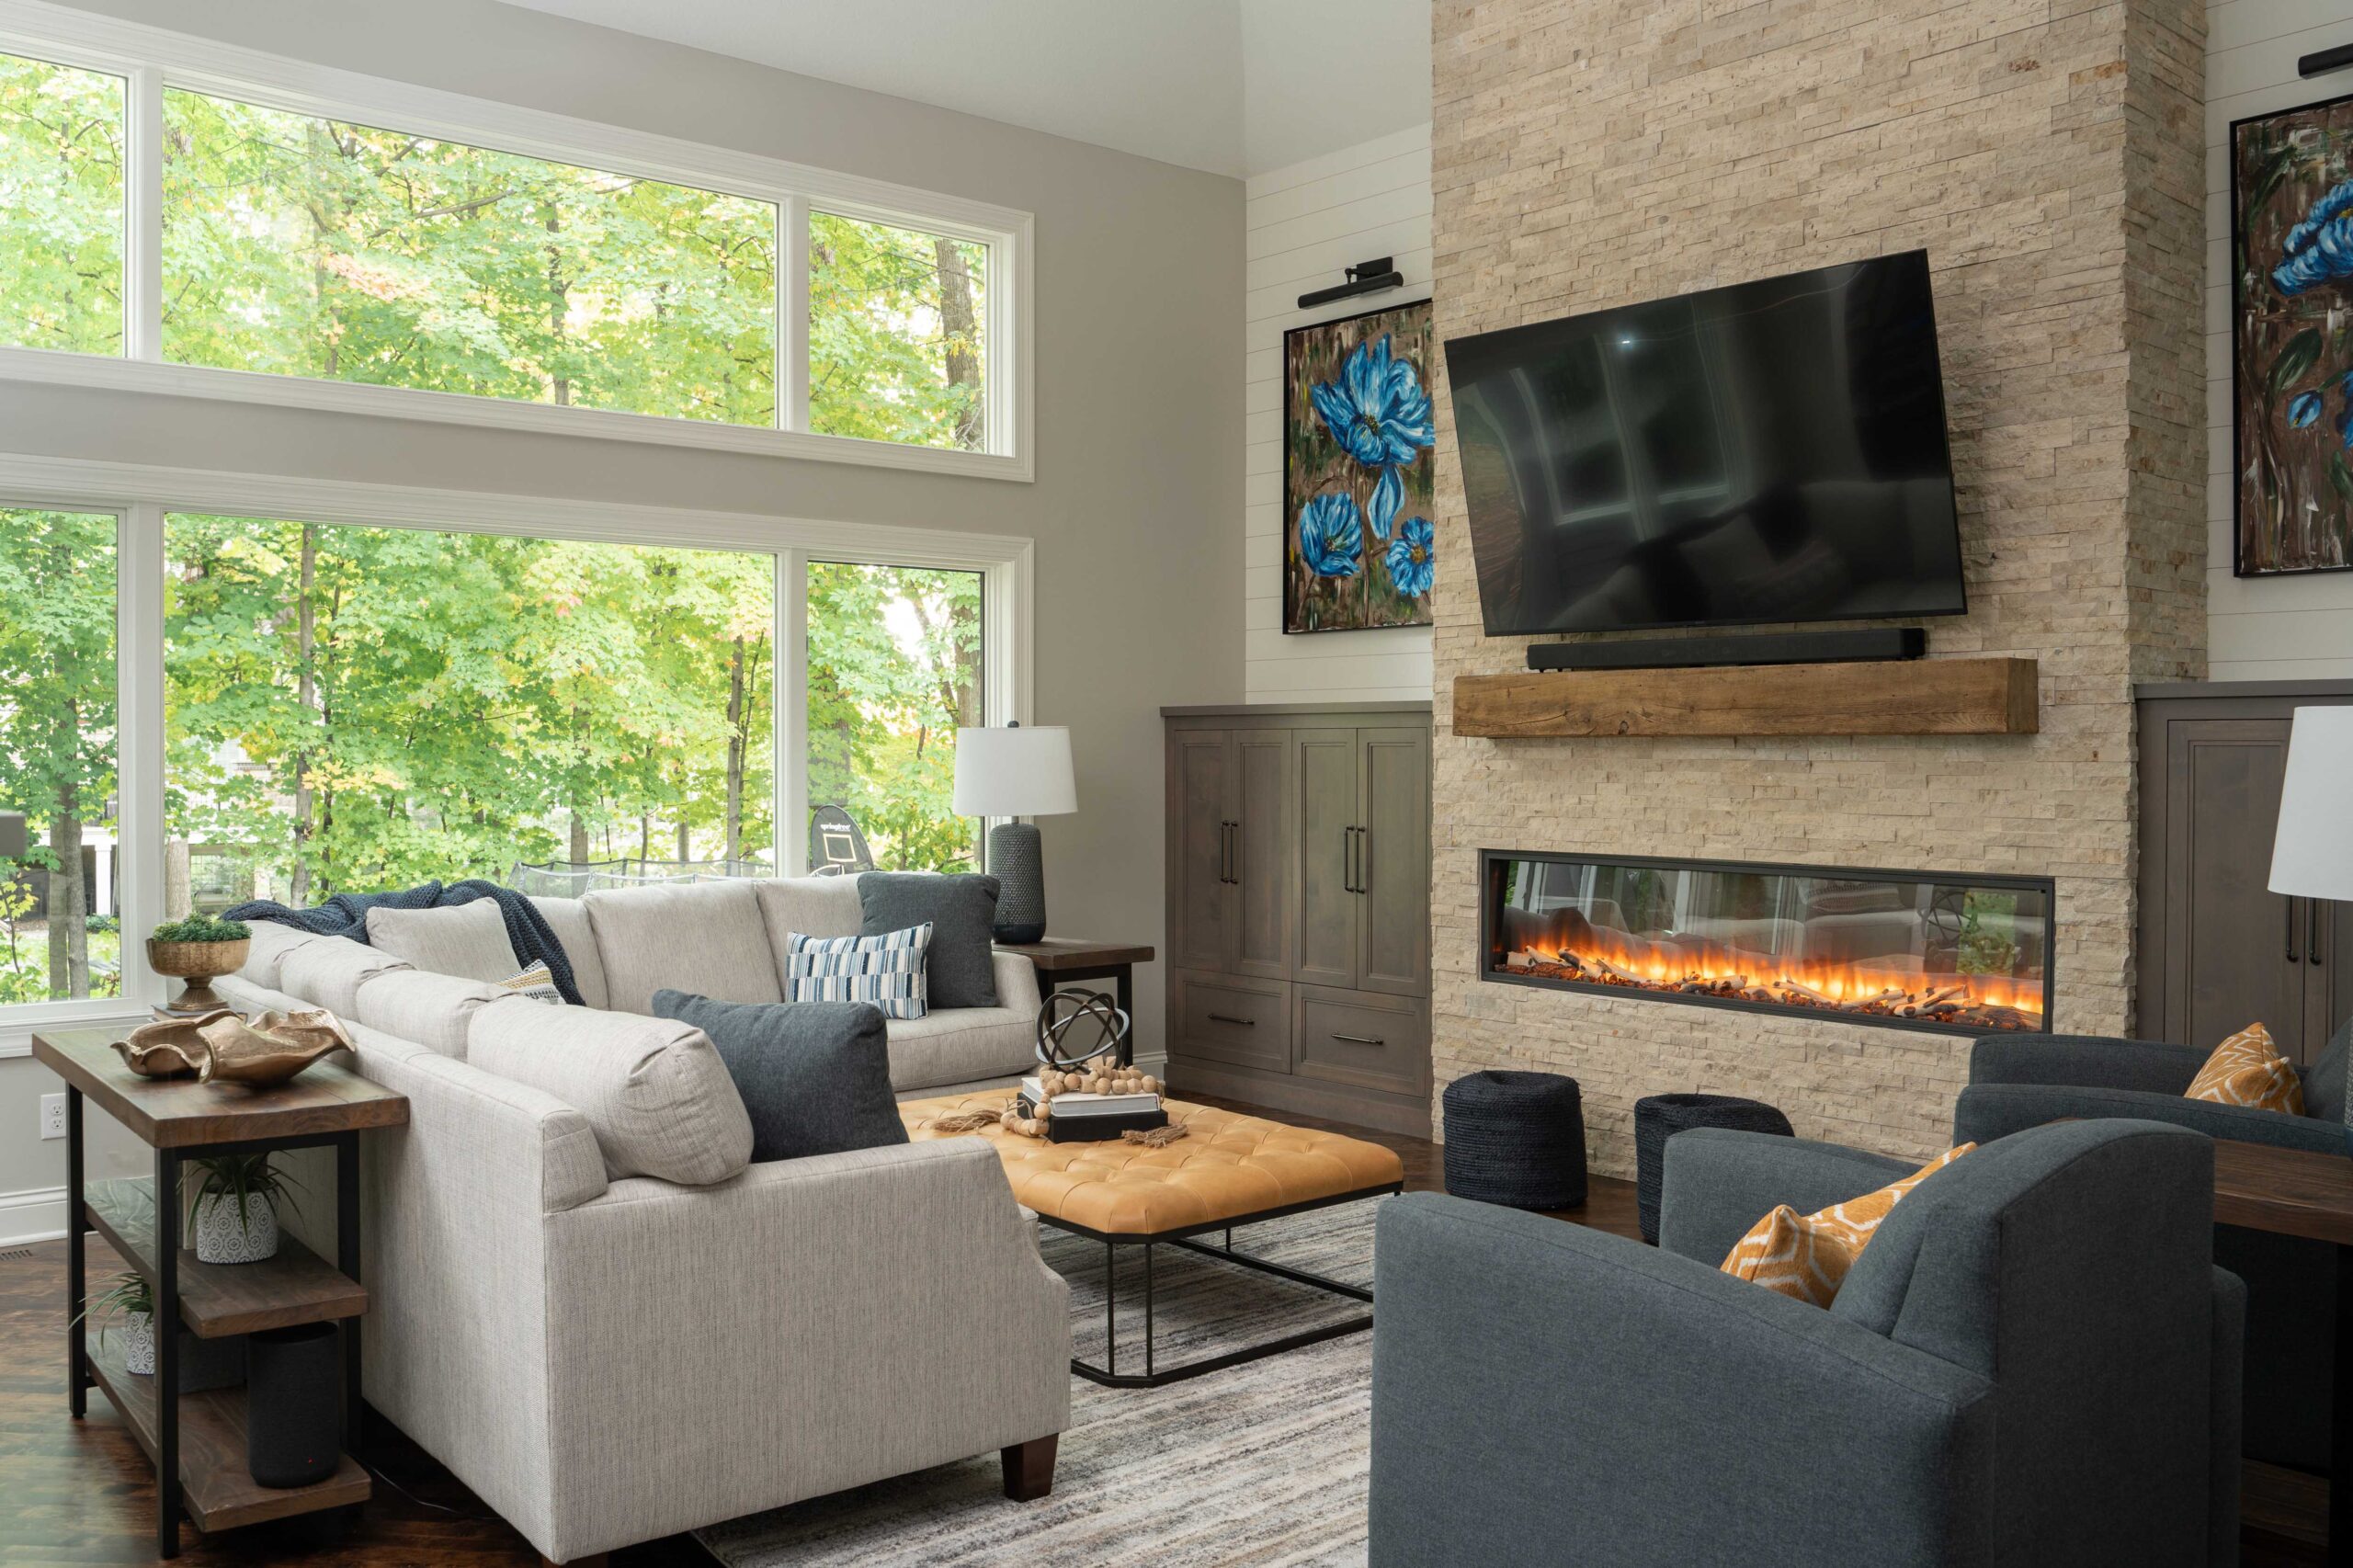 A cozy living room with a fireplace and TV, located on Woodside Road.